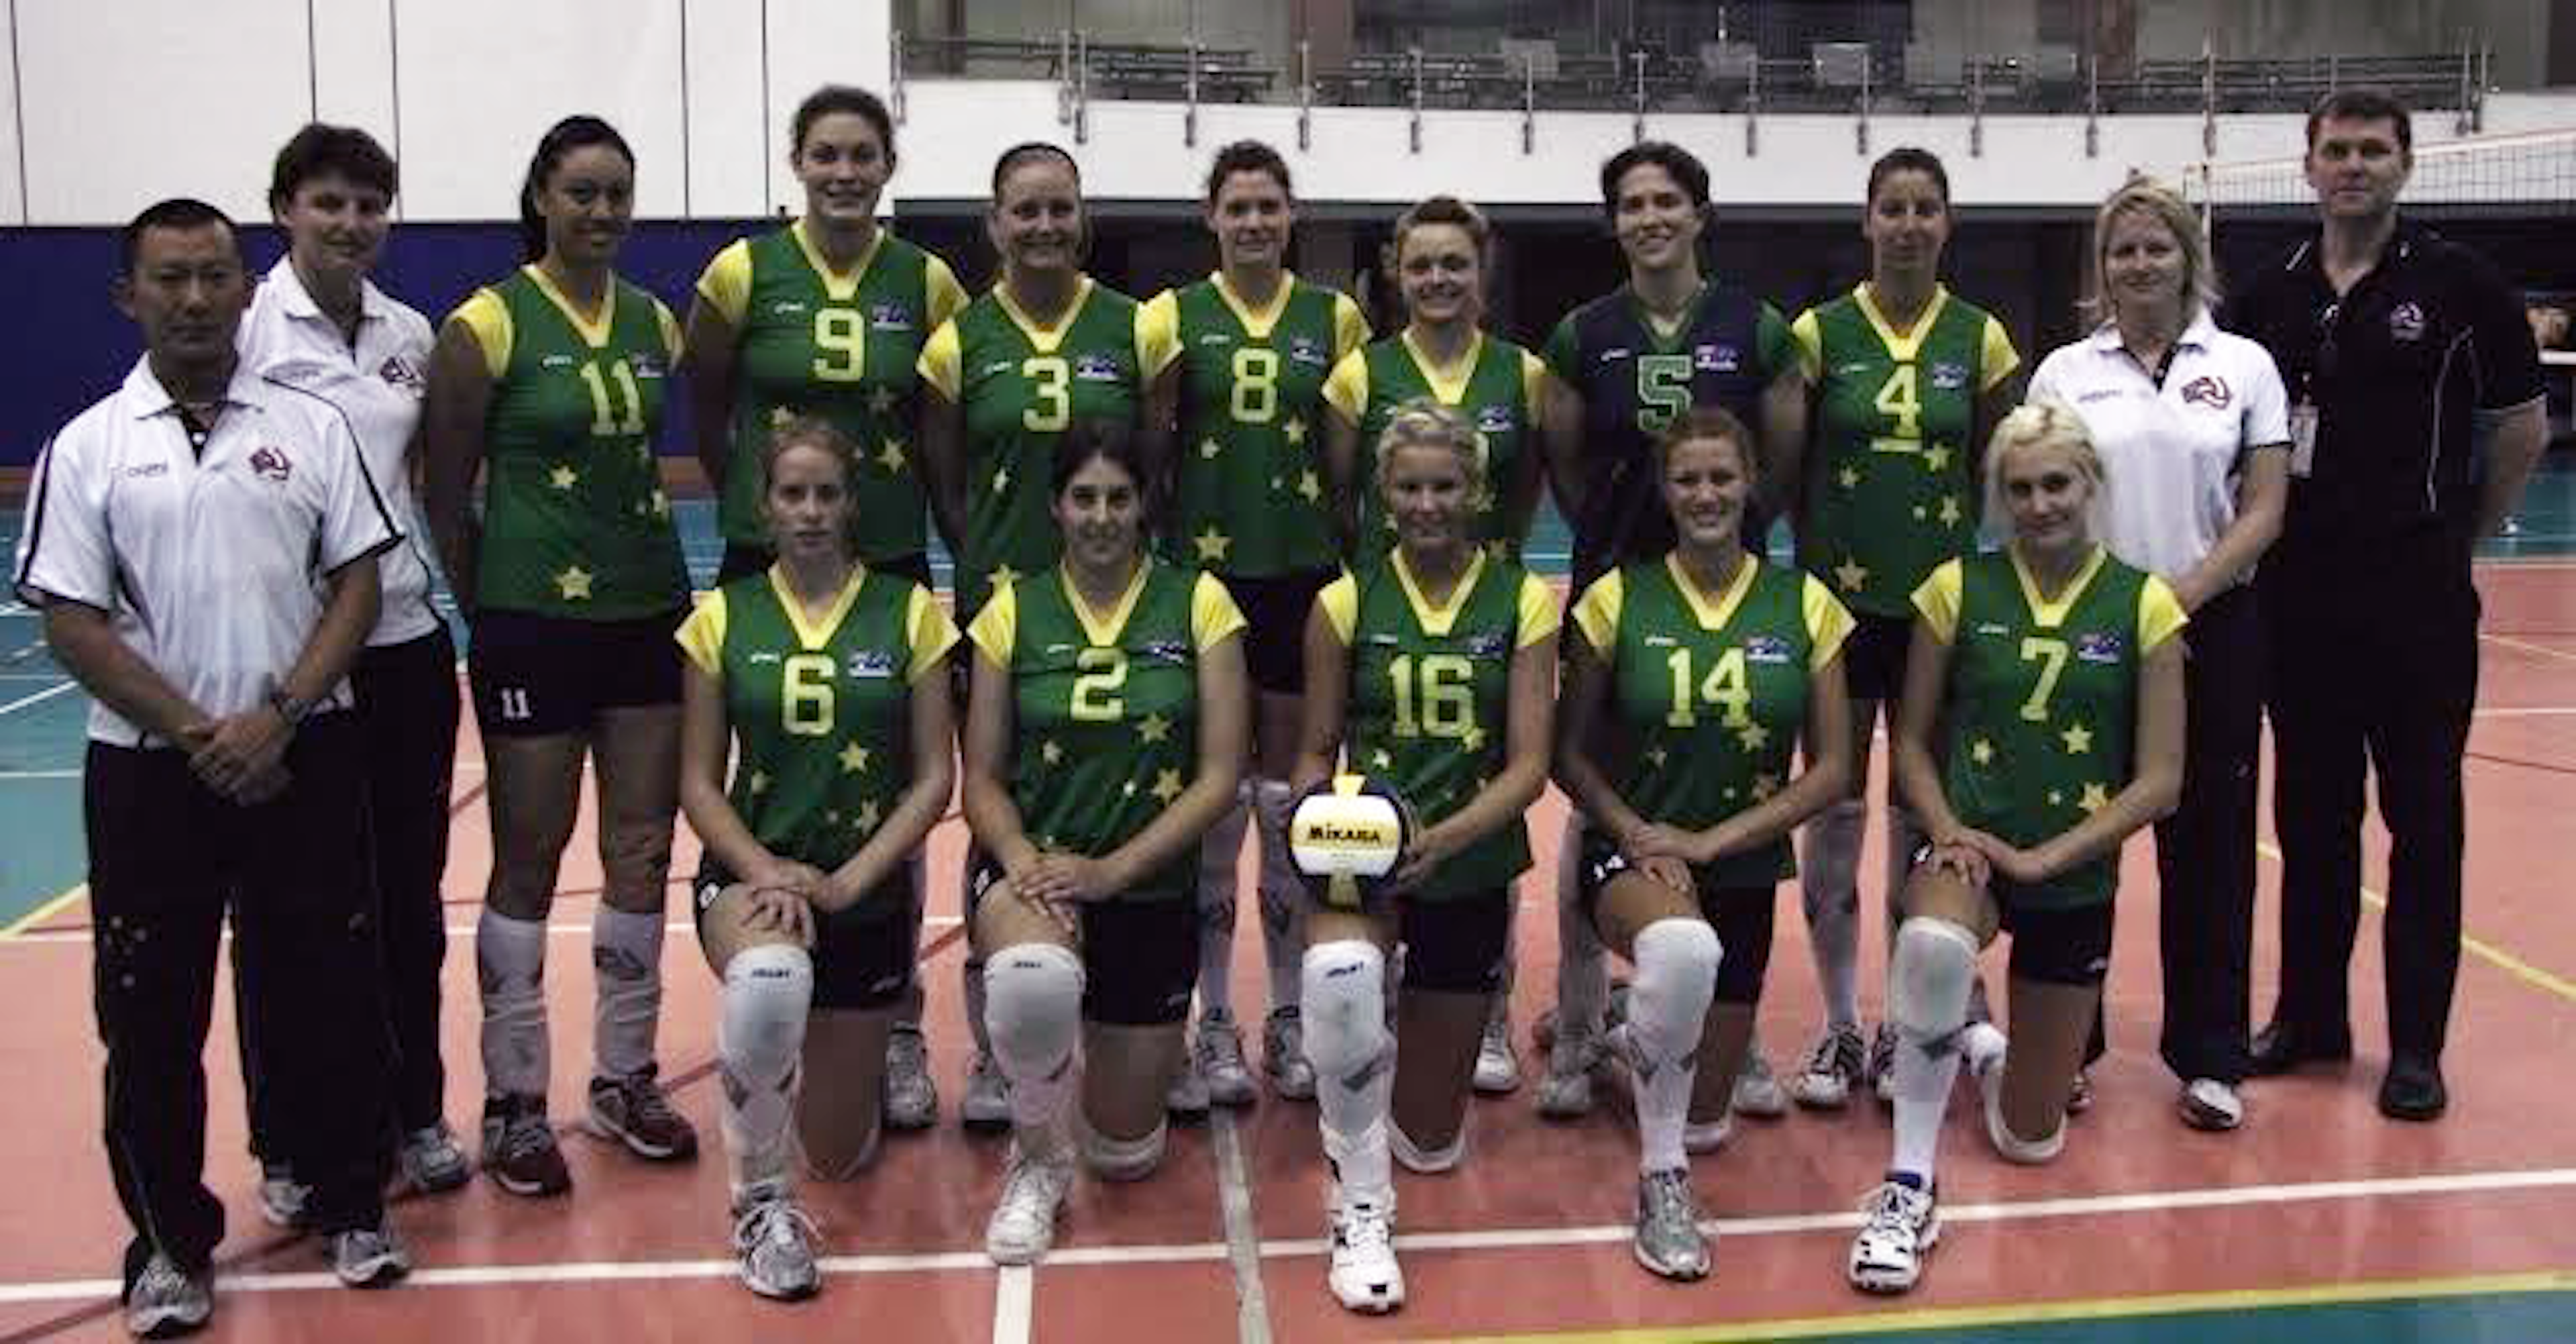 Amanda (right) with the 2008 Australian Women’s Volleyball Team at the International Women’s Volleyball Tournament, Abu Dhabi.